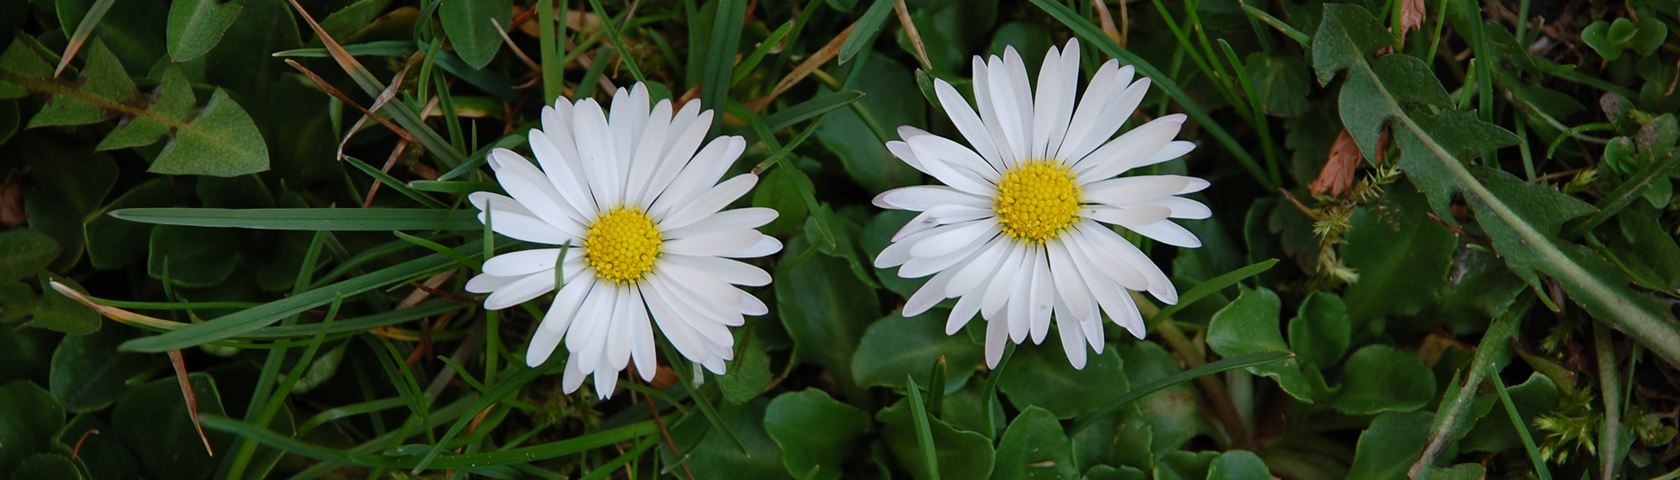 Two Daisies in the Grass